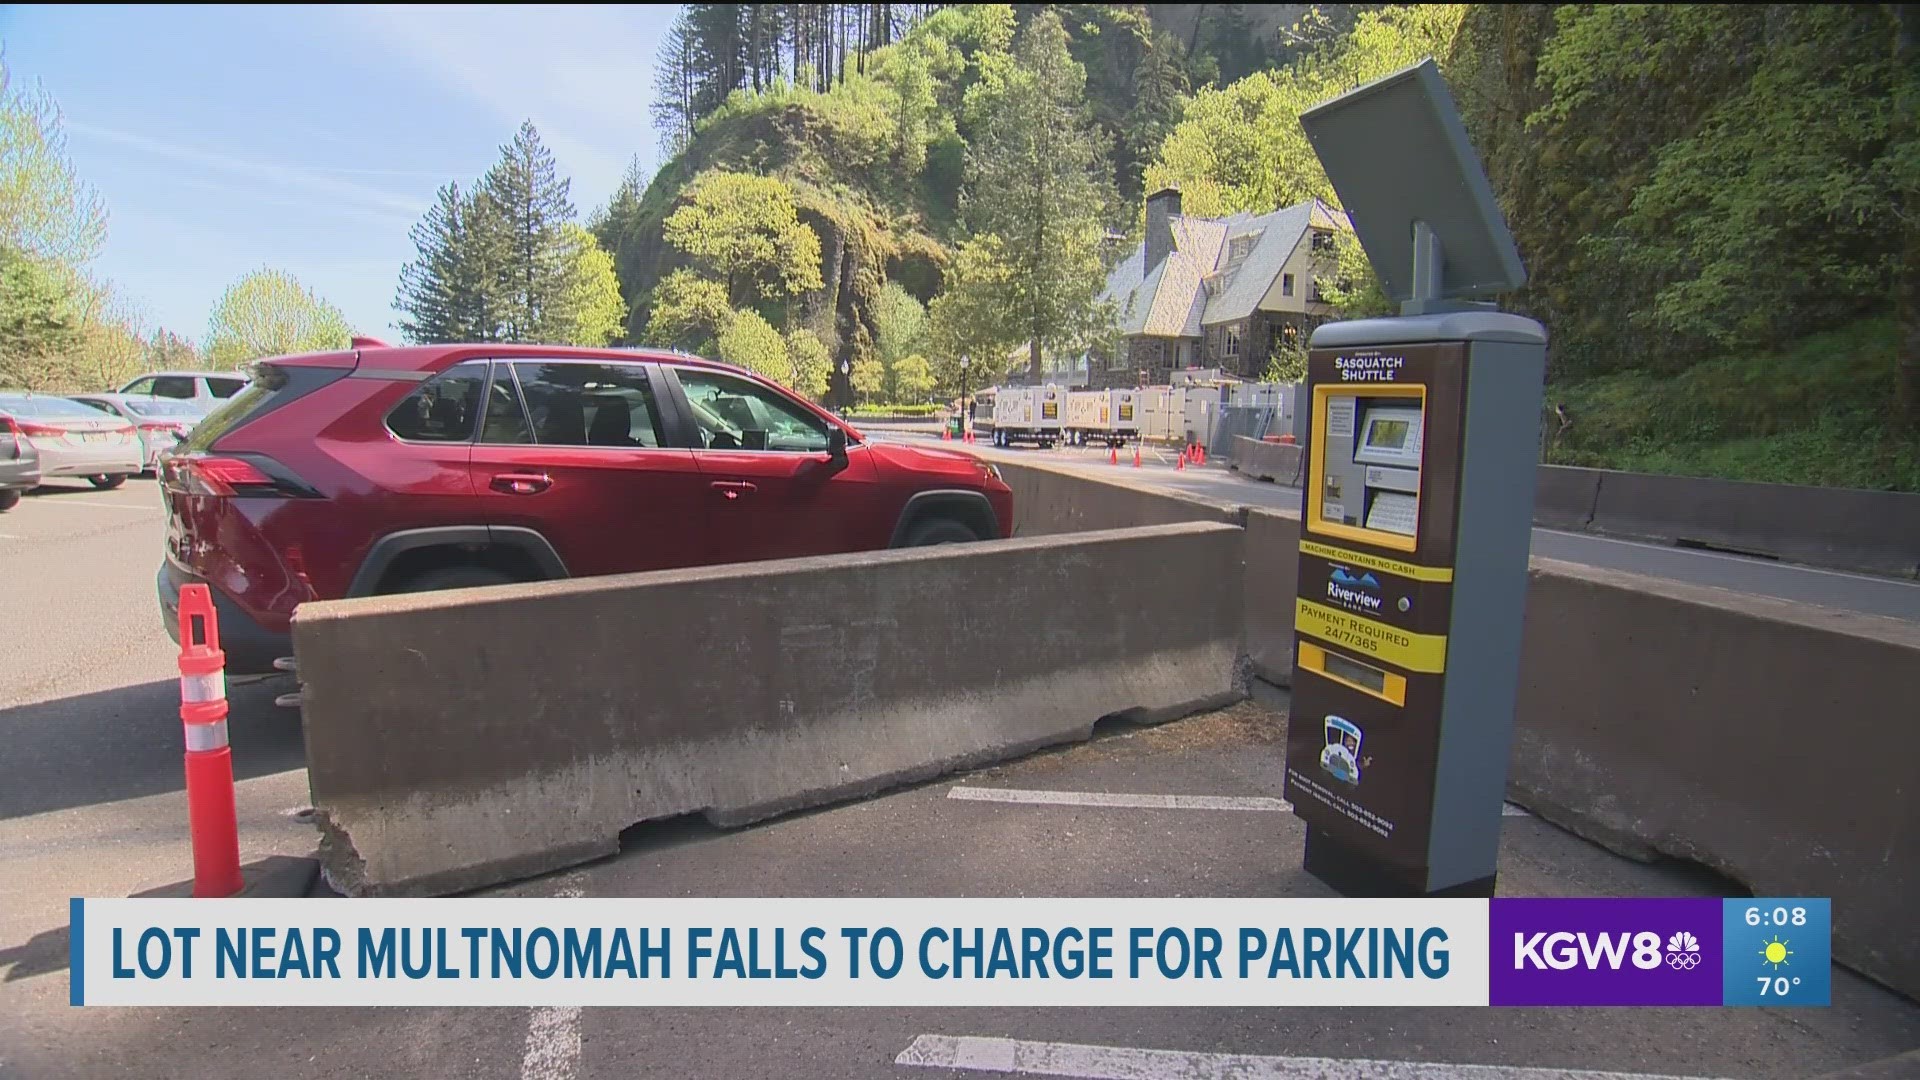 Soon, it’ll cost as much as $20 to park near the famous Multnomah Falls that draws 2 to 3 million people every year.